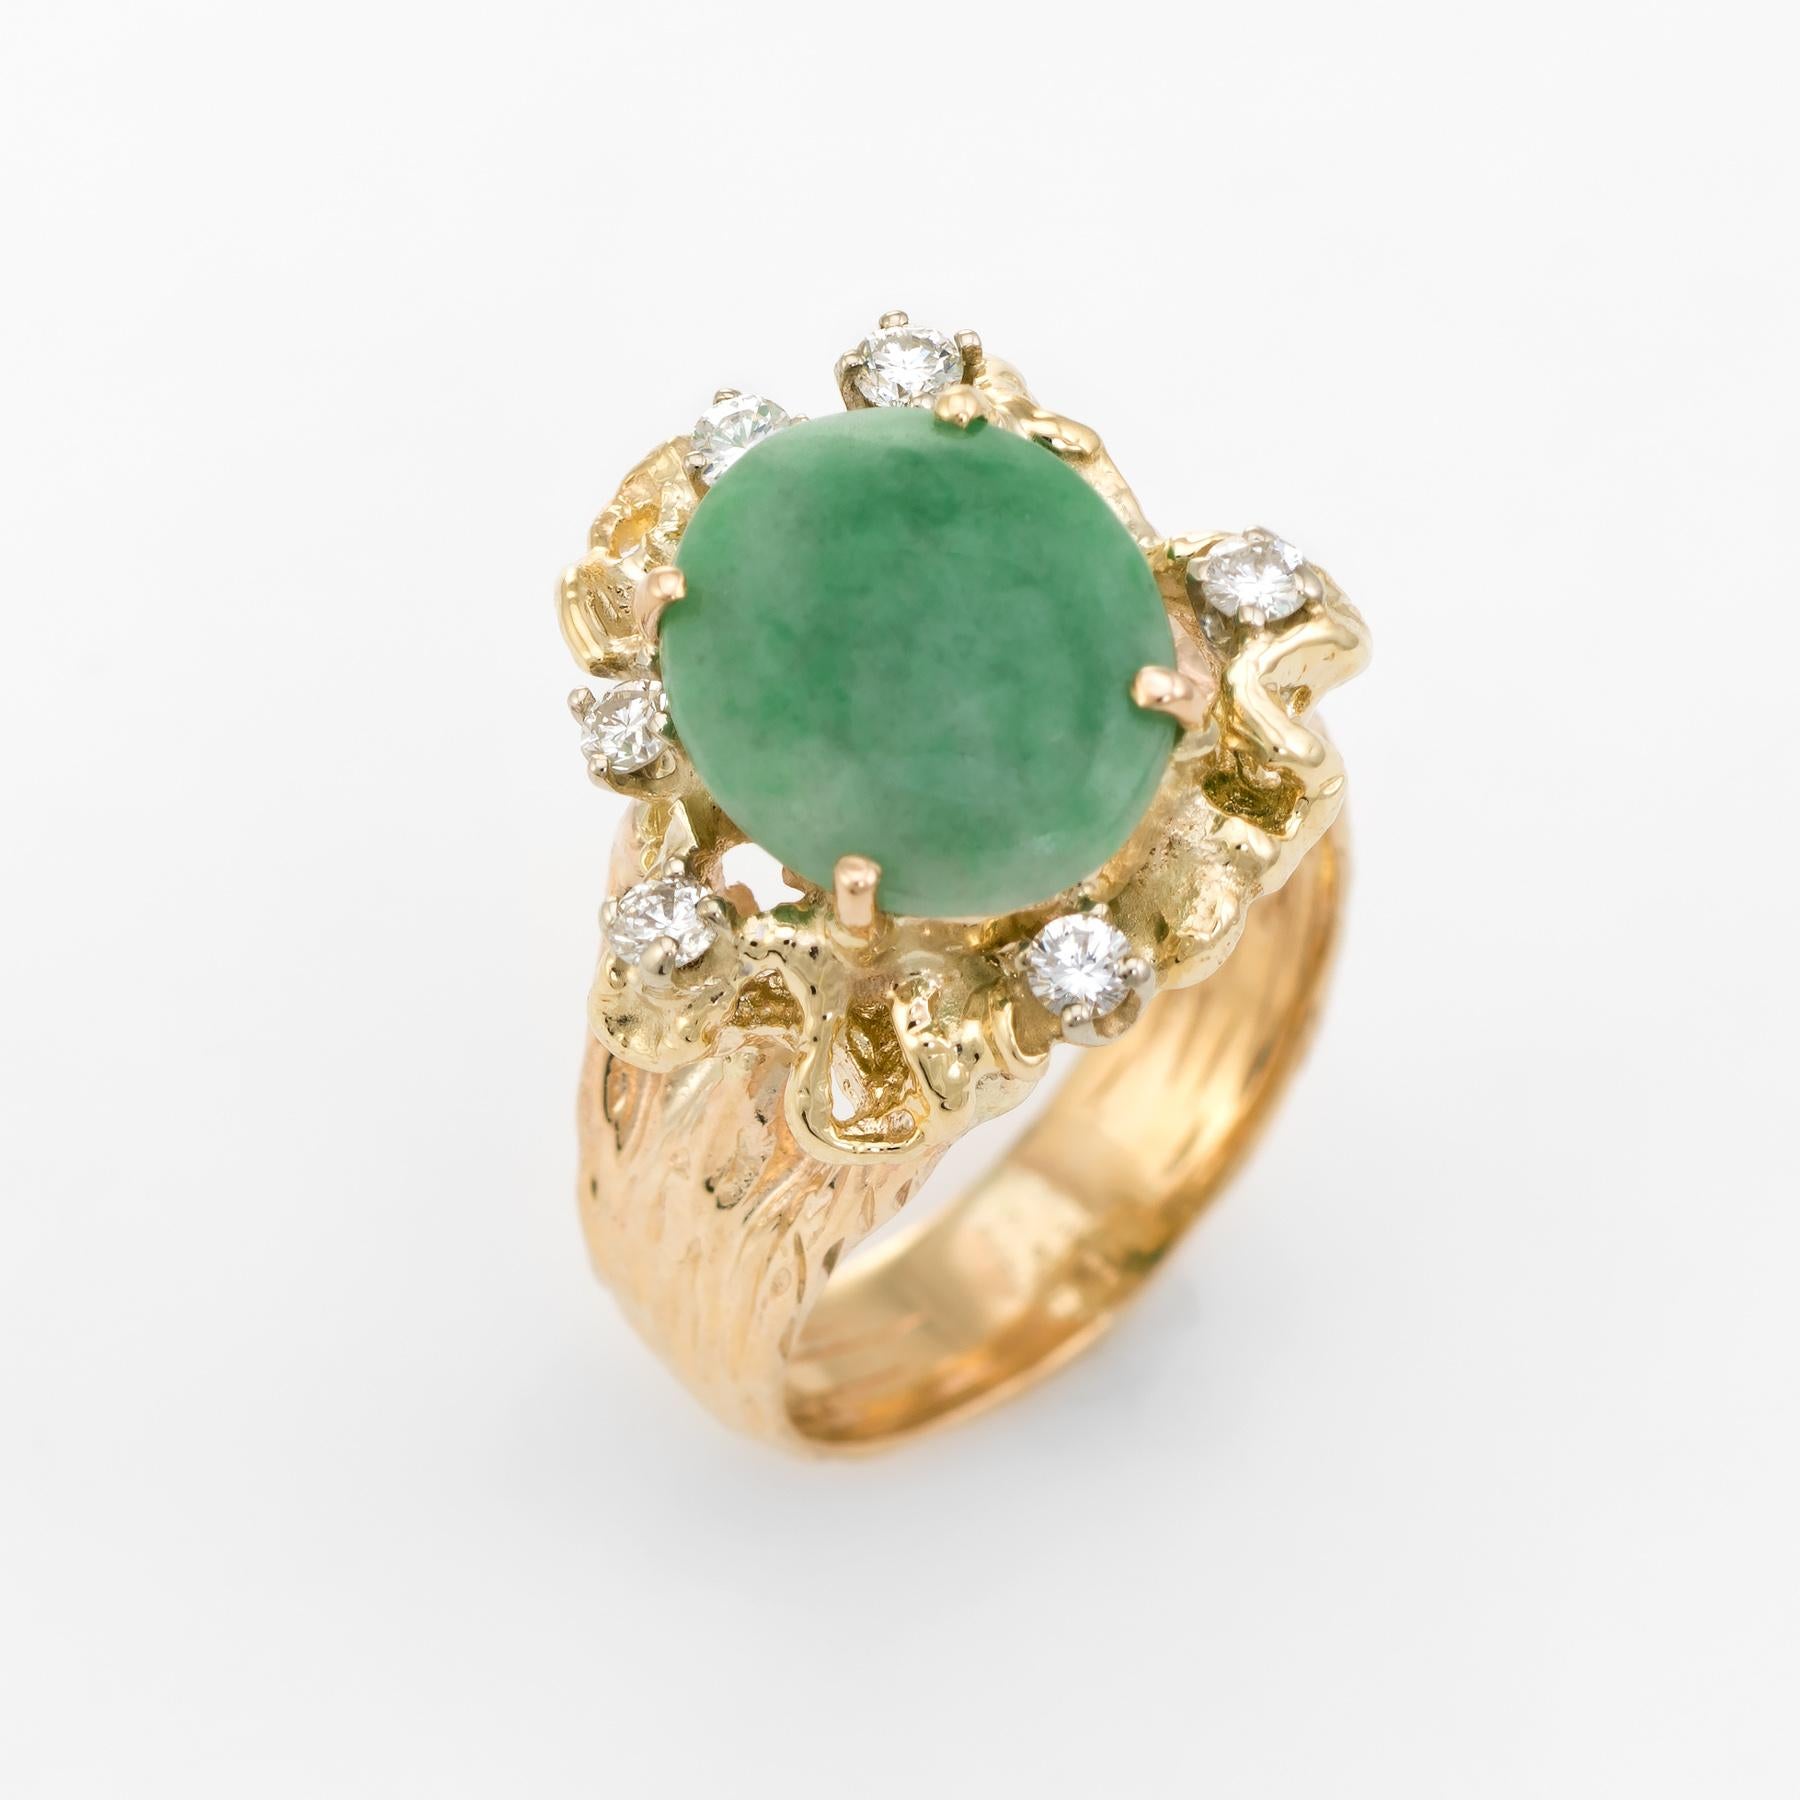 Distinct and unusual vintage nugget cocktail ring (circa 1960s to 1970s), crafted in 14 karat yellow gold. 

Oval cabochon cut jade measures 12mm x 9.75mm (estimated at 6 carats), accented with 6 approx. 0.03 carat round brilliant cut diamonds. The